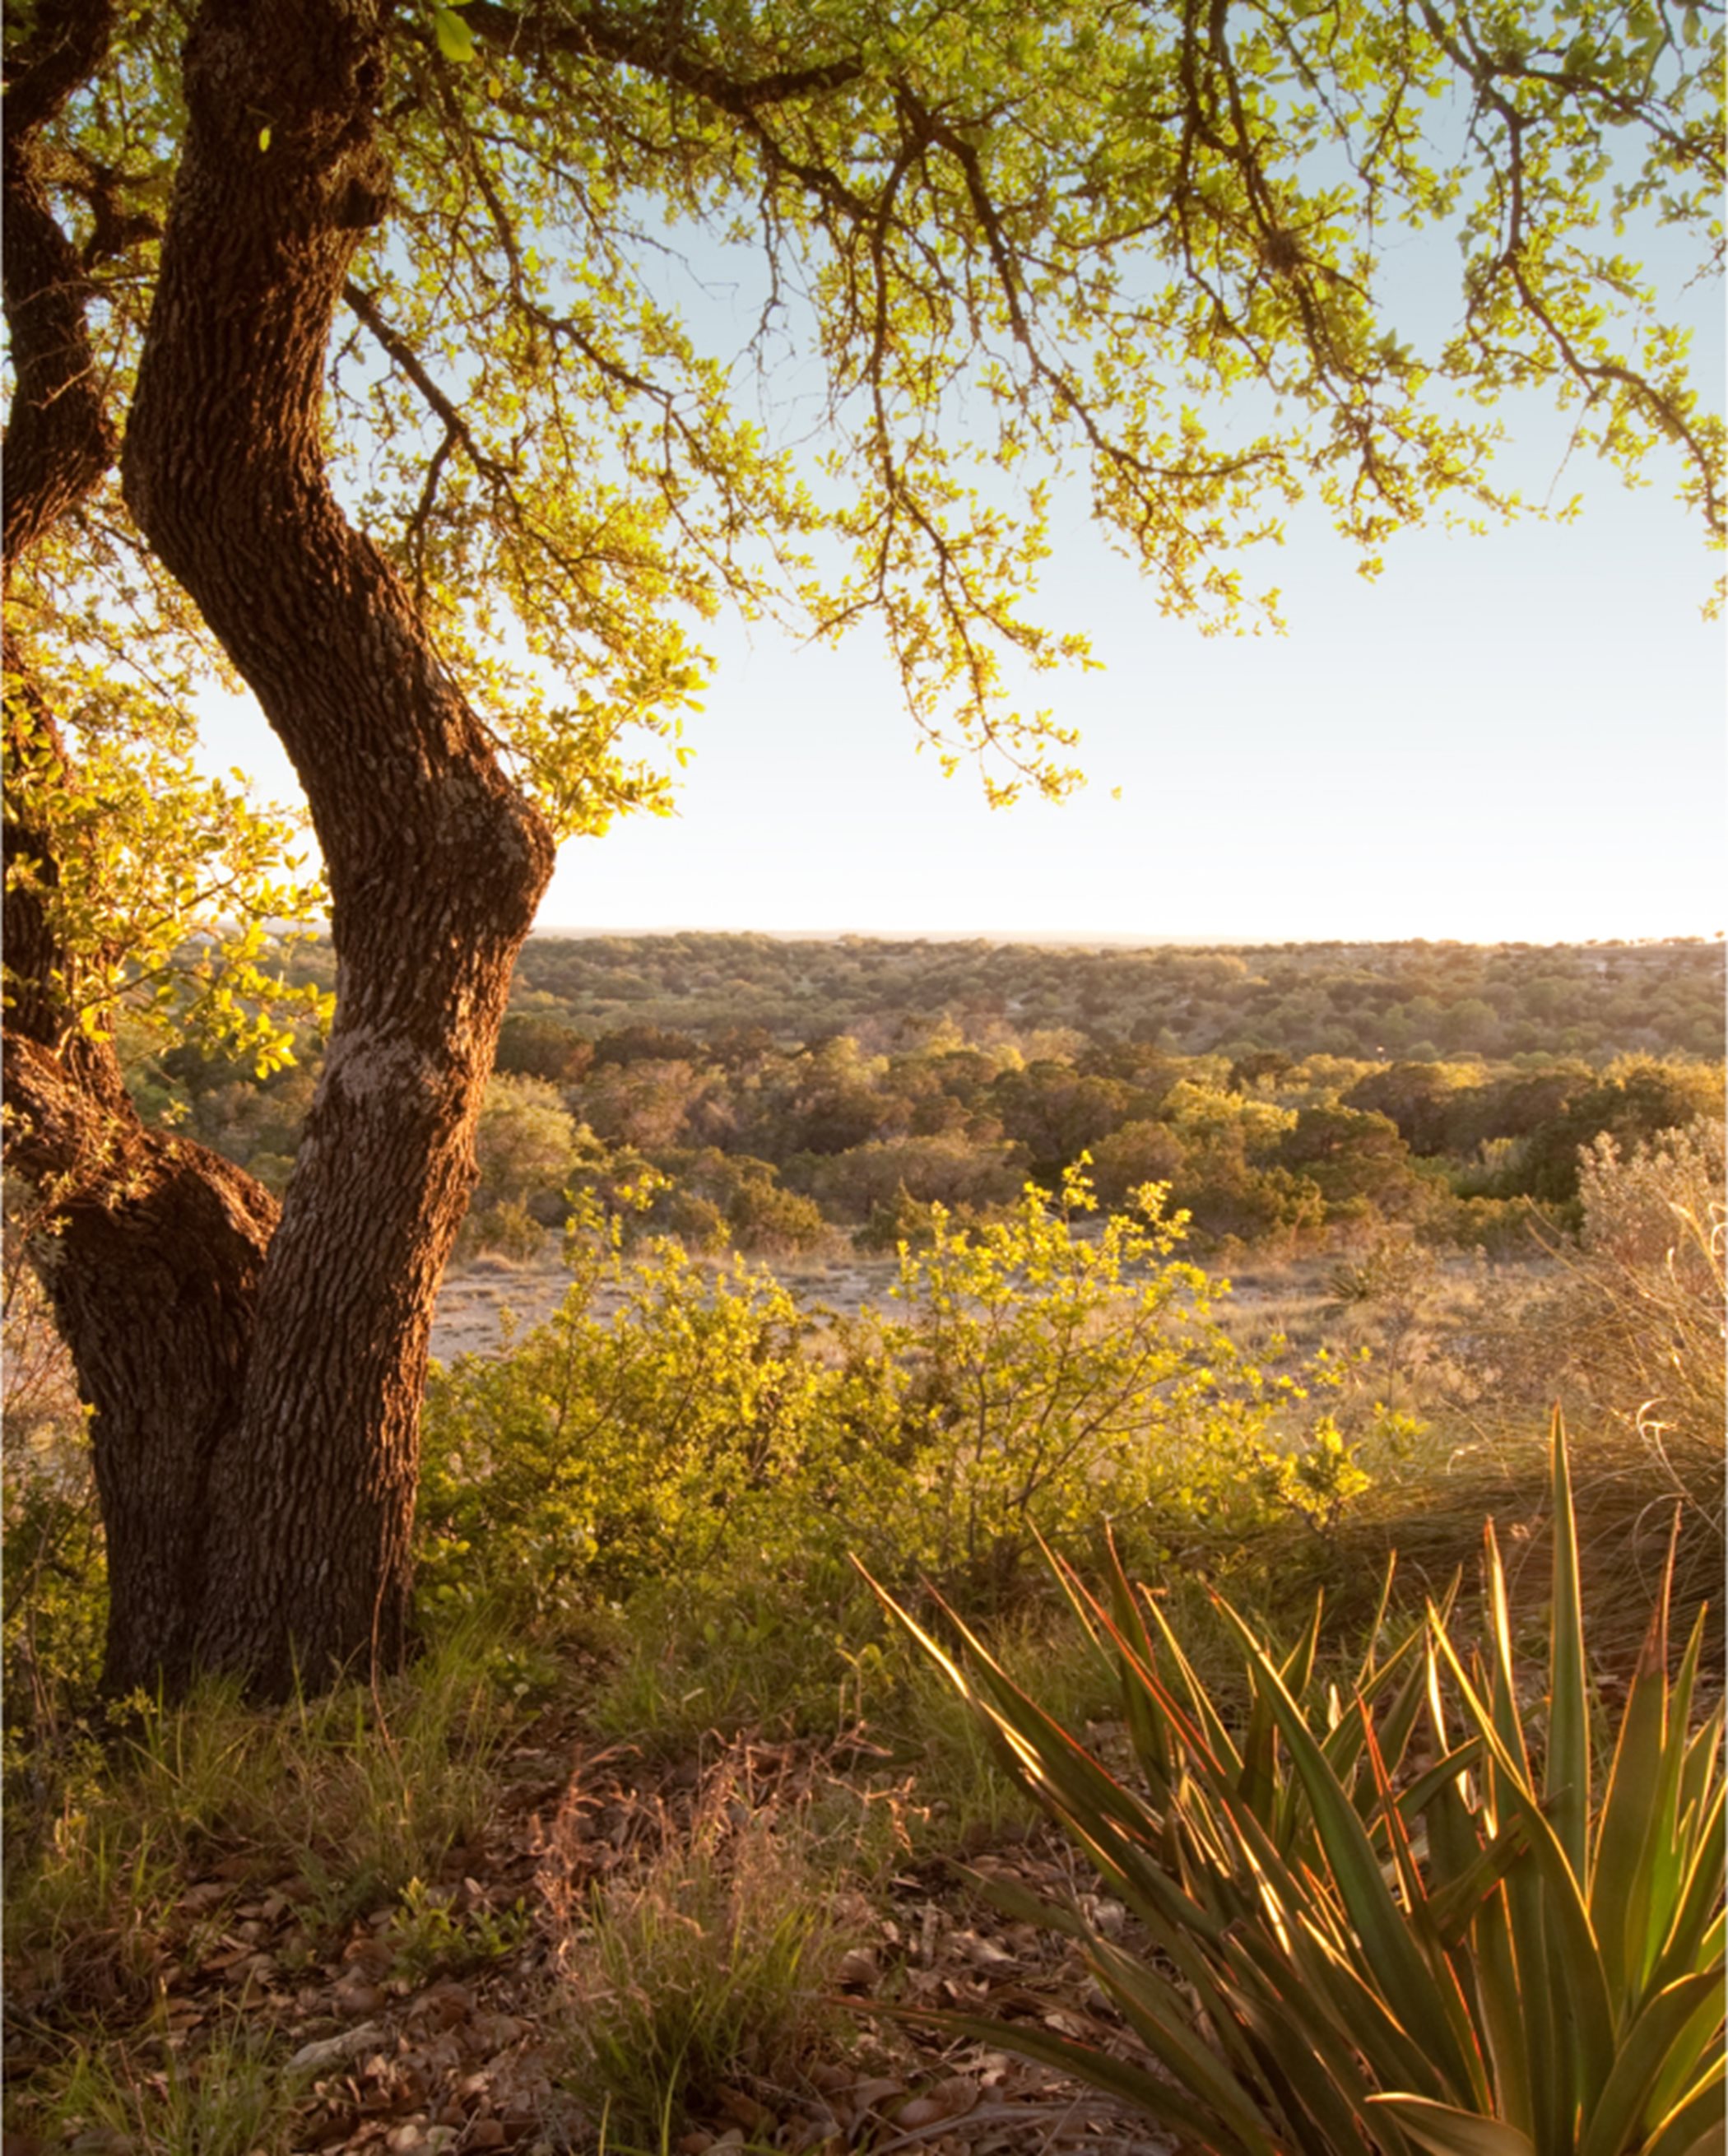 Texas Hill Country scenery